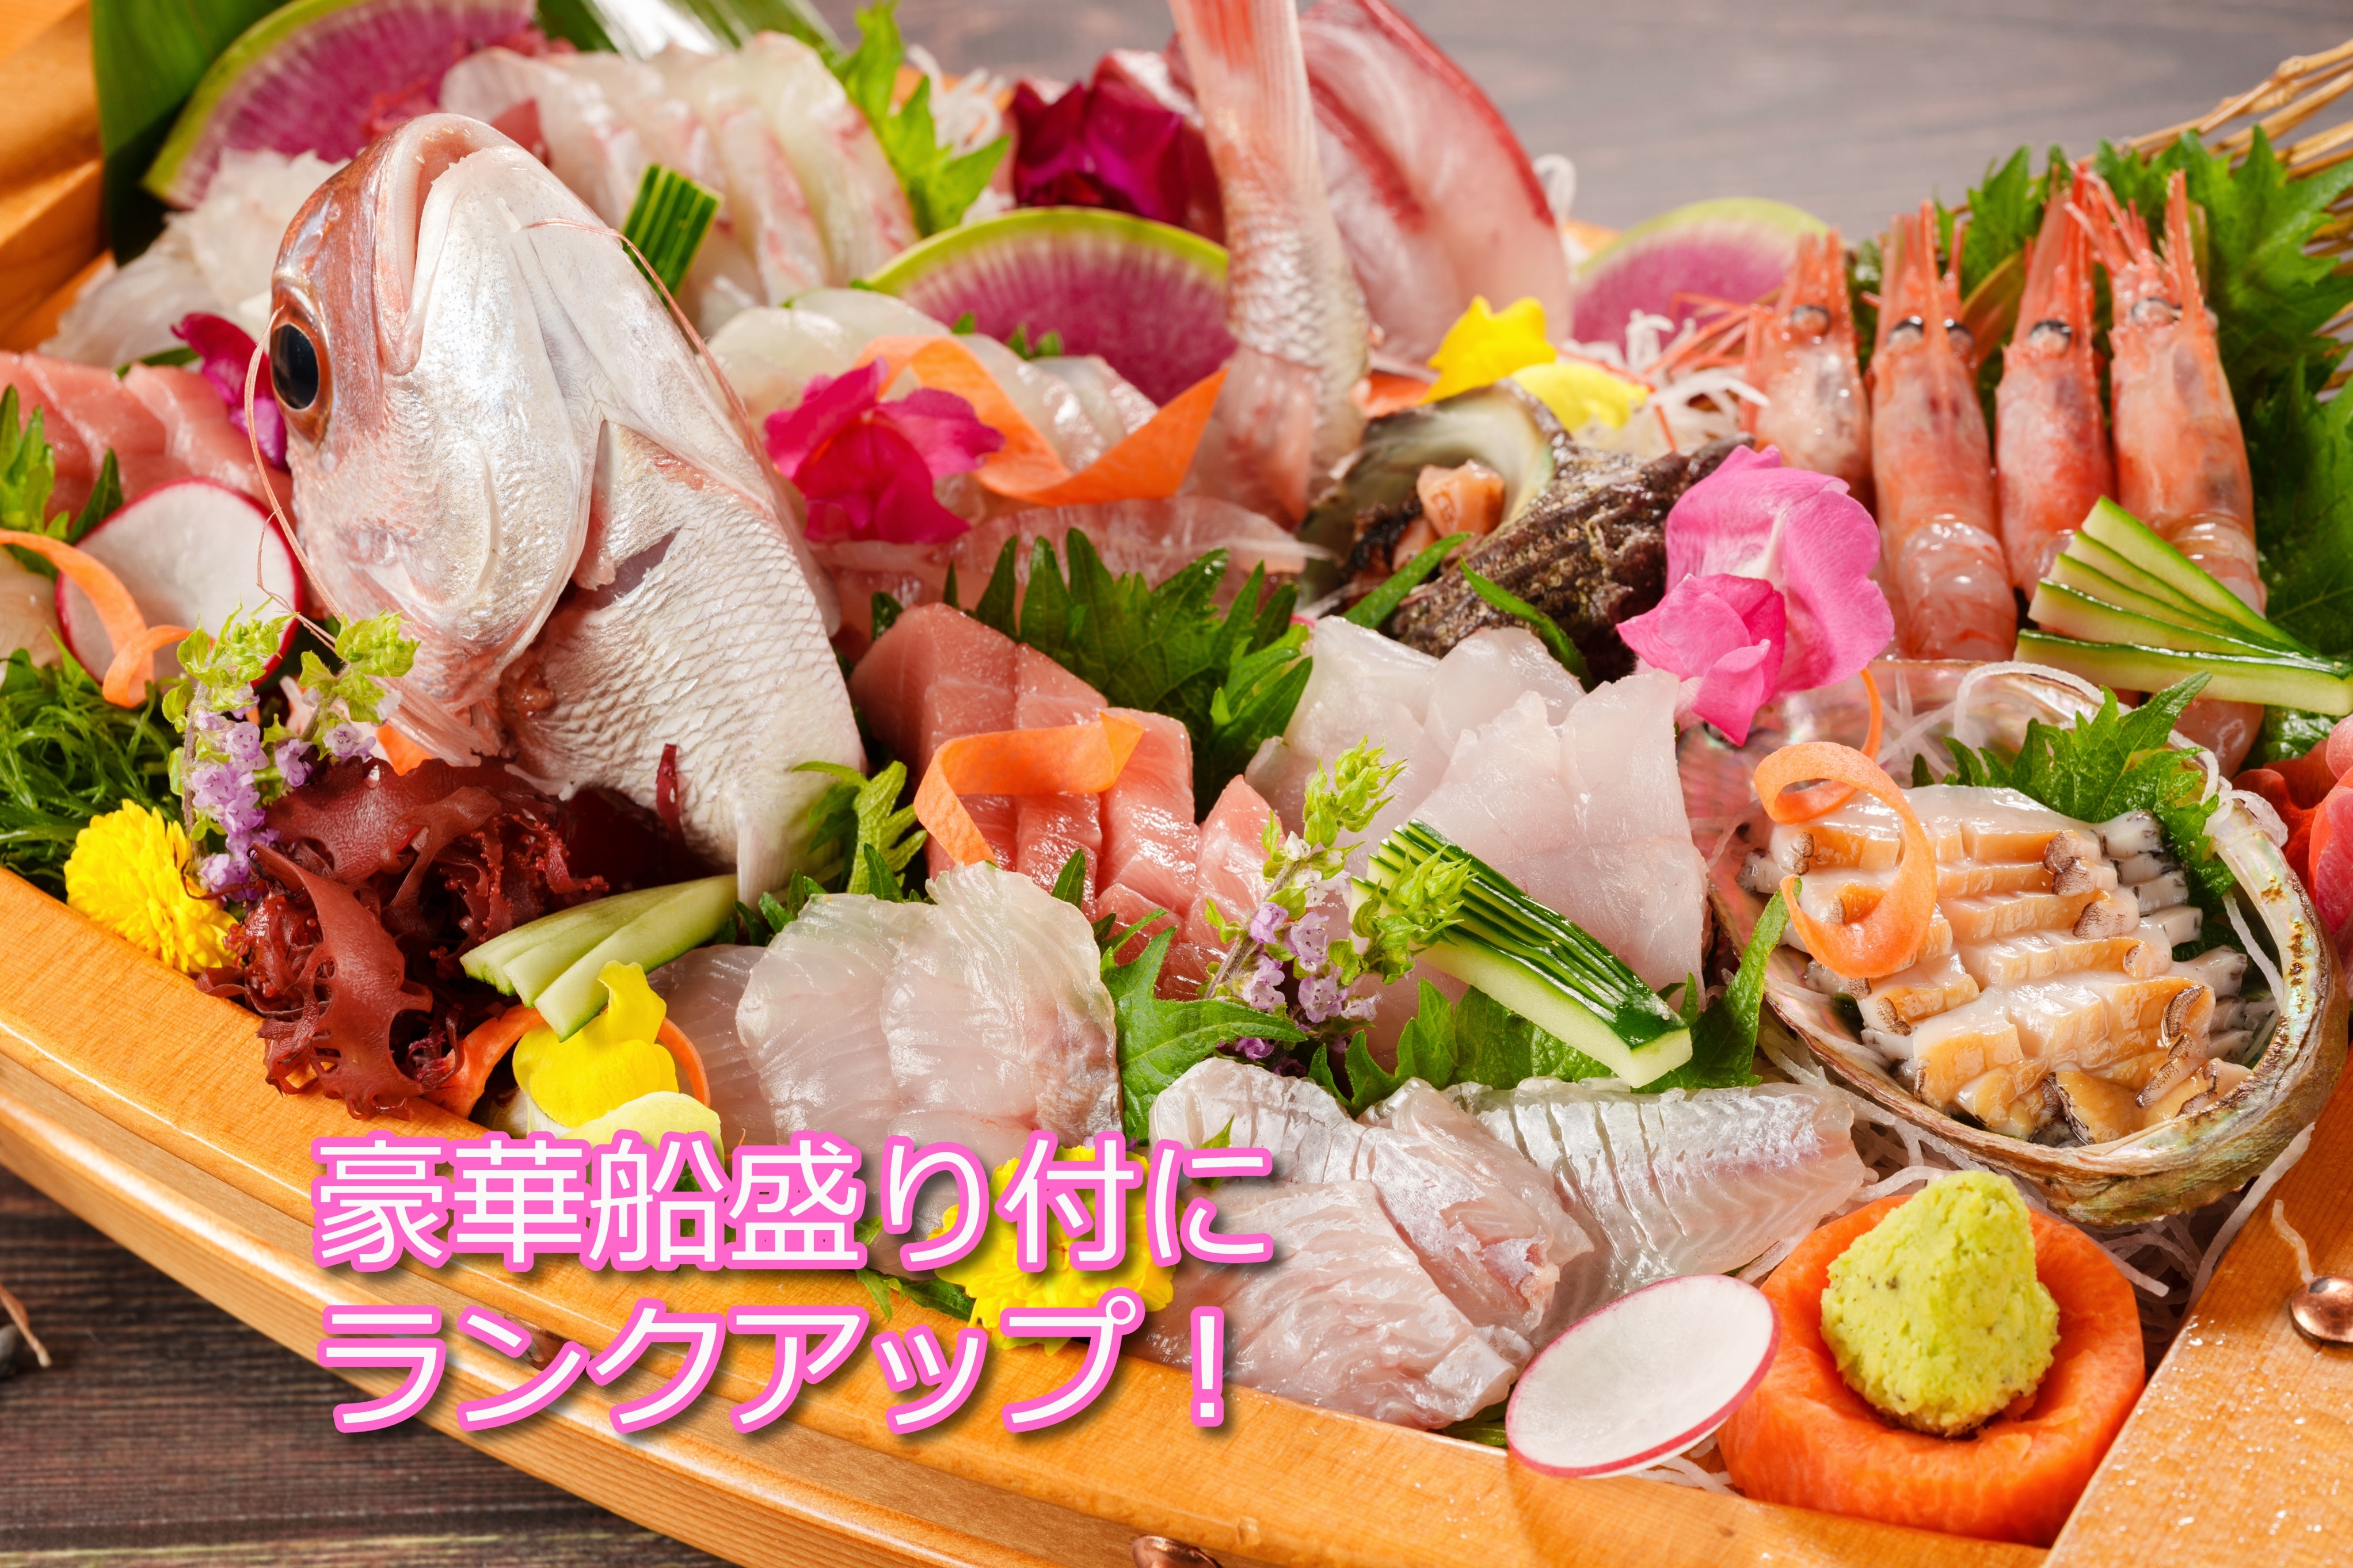 Enjoy the fresh sashimi from the Sea of Japan to your heart's content! One case